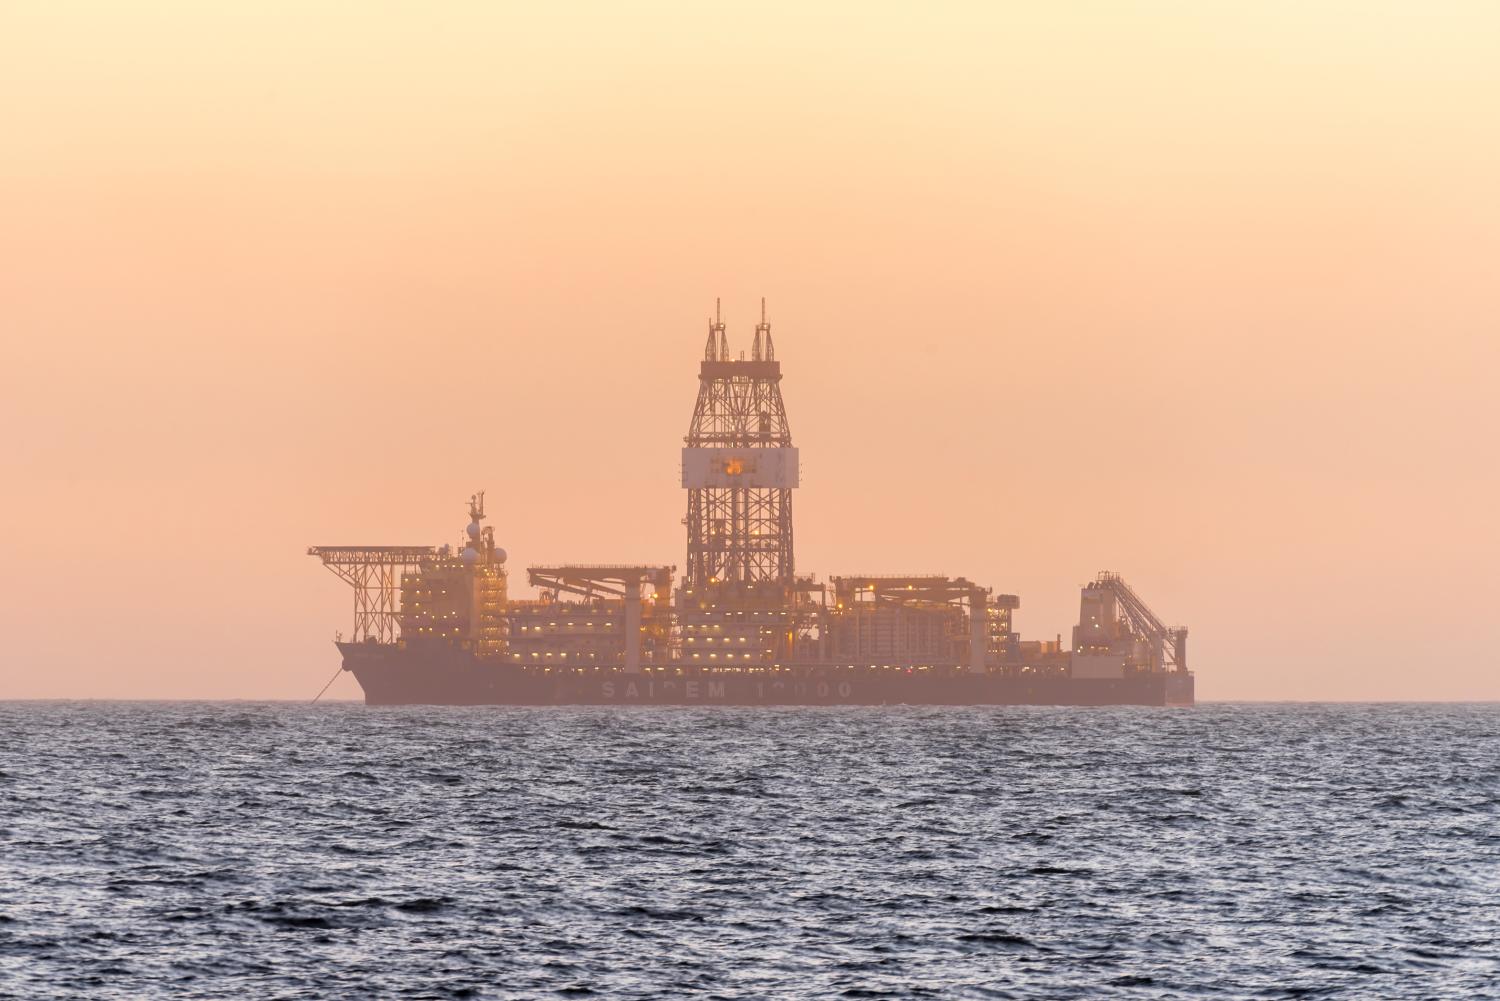 WALVIS BAY, NAMIBIA - JULY 2, 2017: An oil drilling ship anchored after sunset in the Atlantic Ocean at Longbeach in the Namib Desert of Namibia